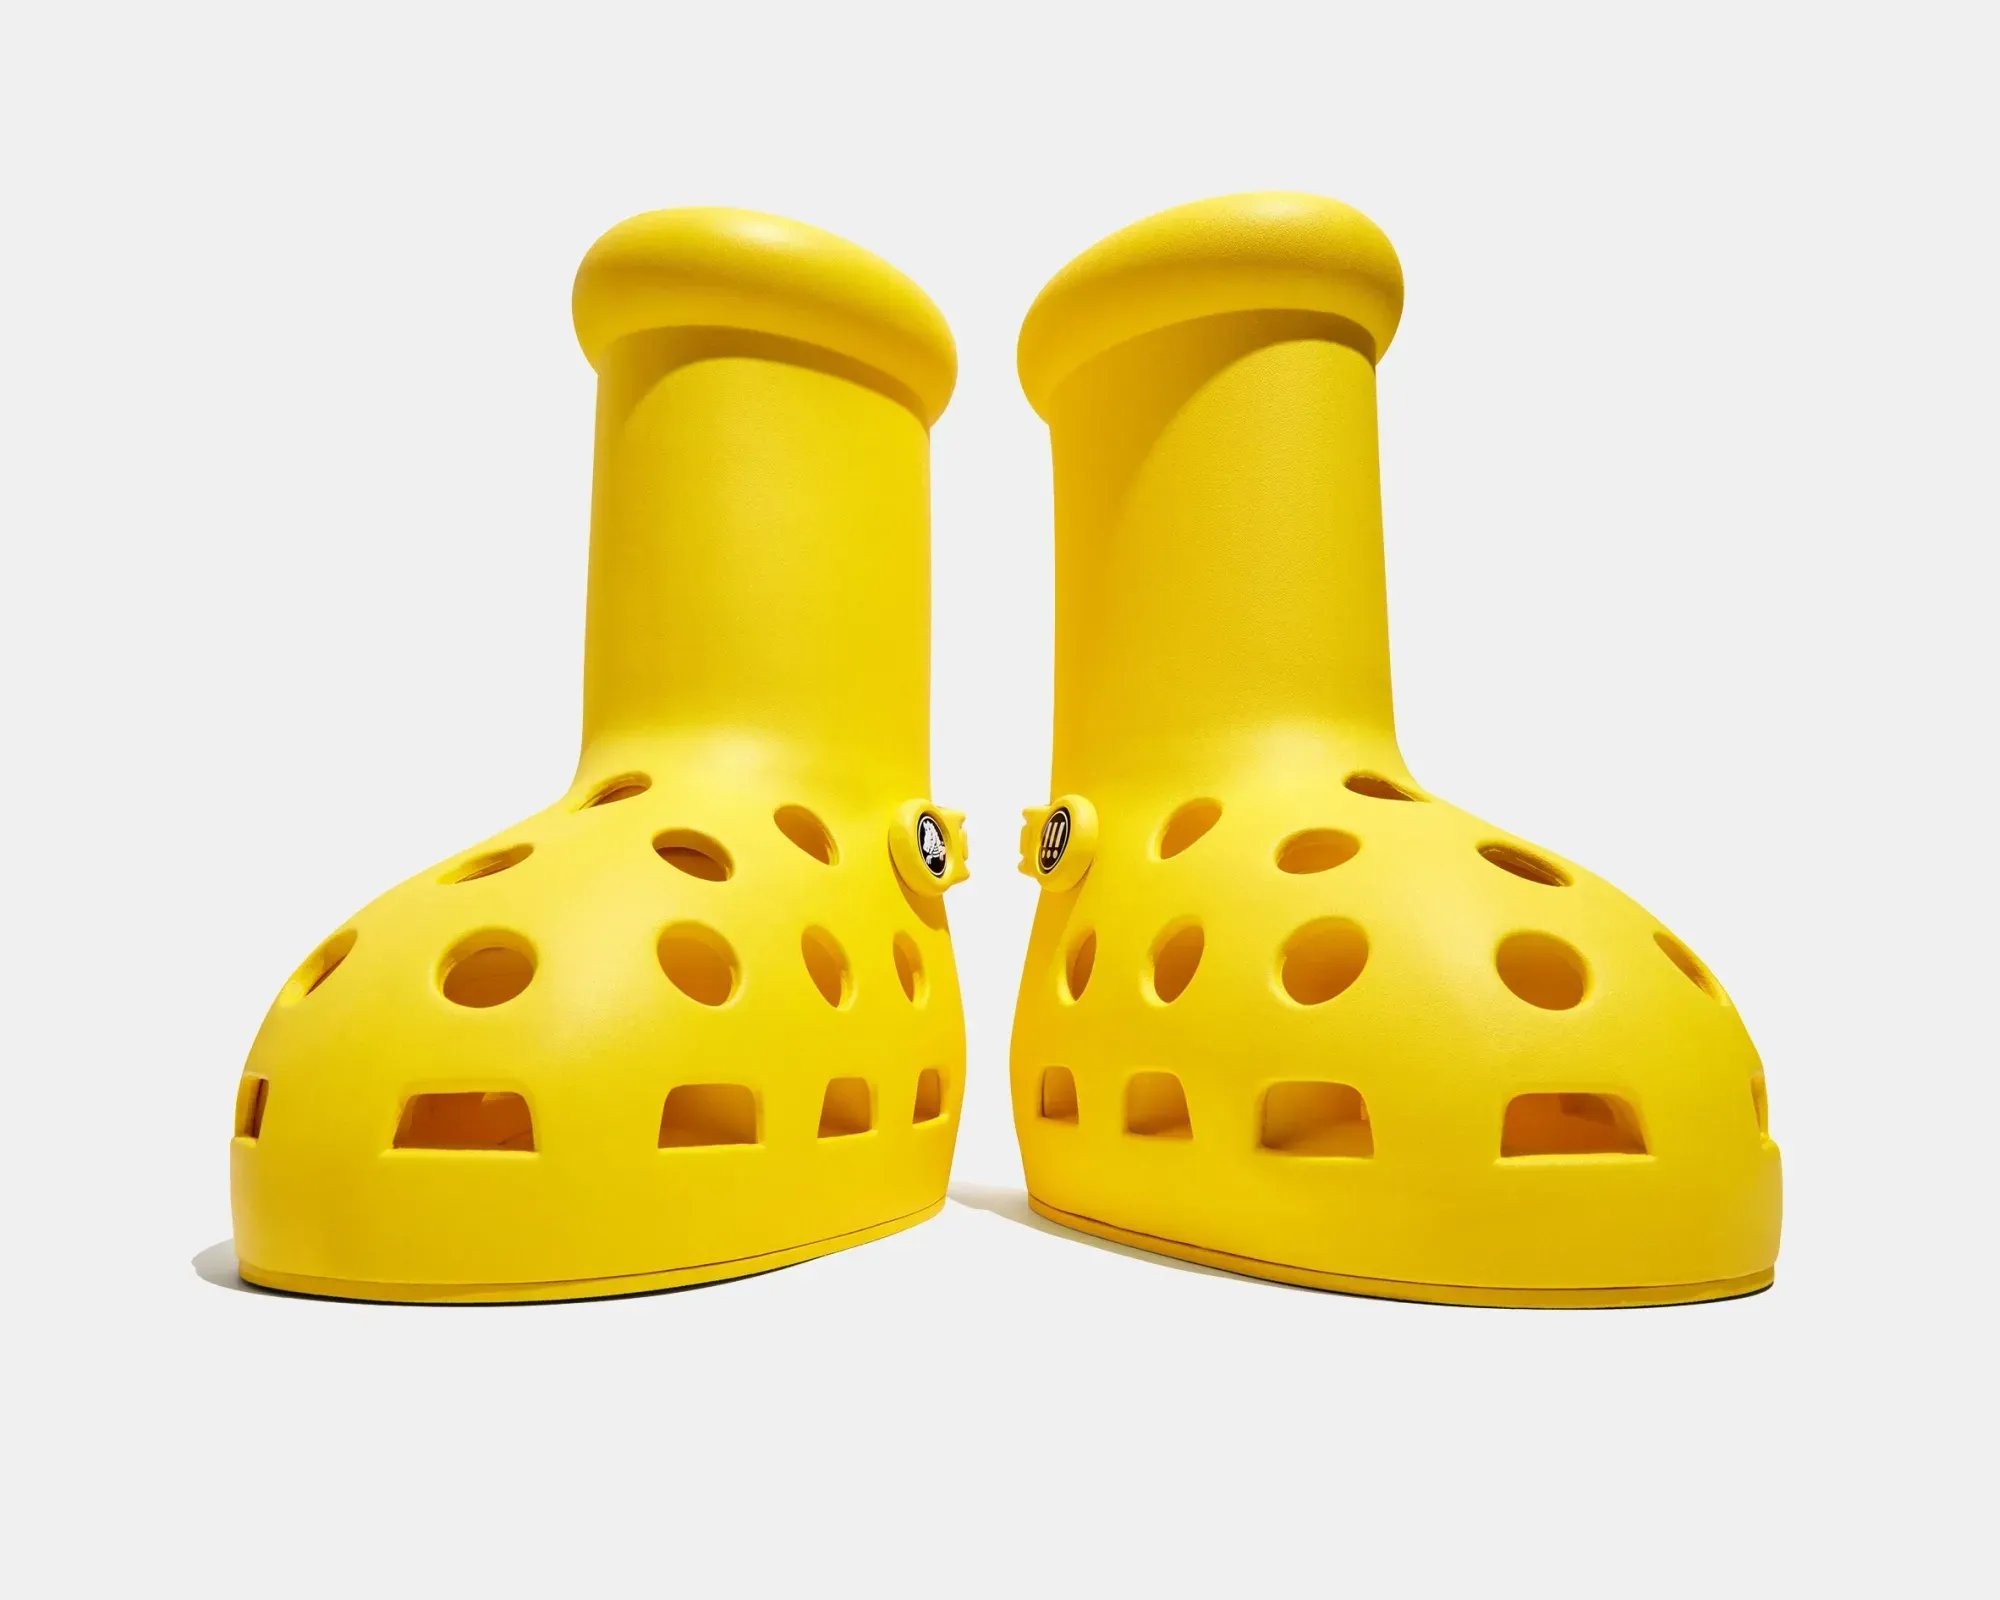 After the big red boots, here come the big yellow boots with holes | MSCHF x Crocs